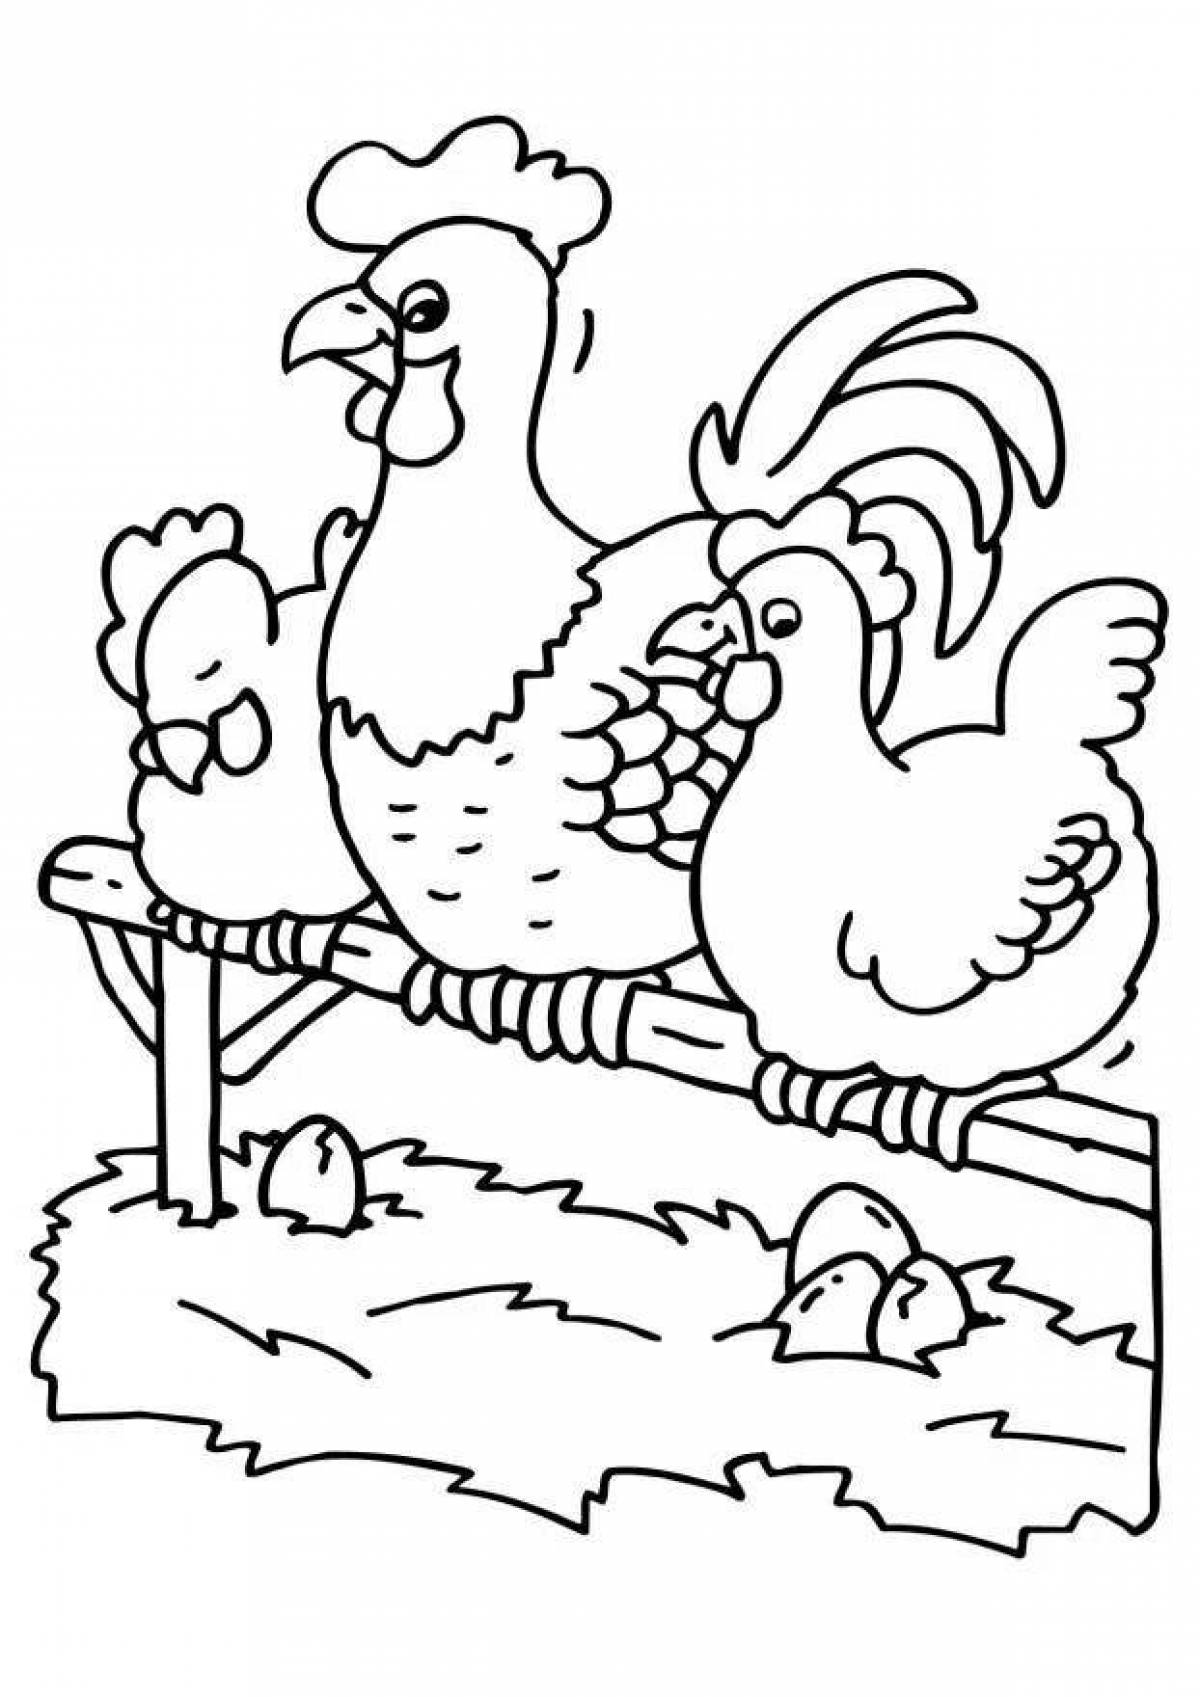 Graceful chicks coloring page